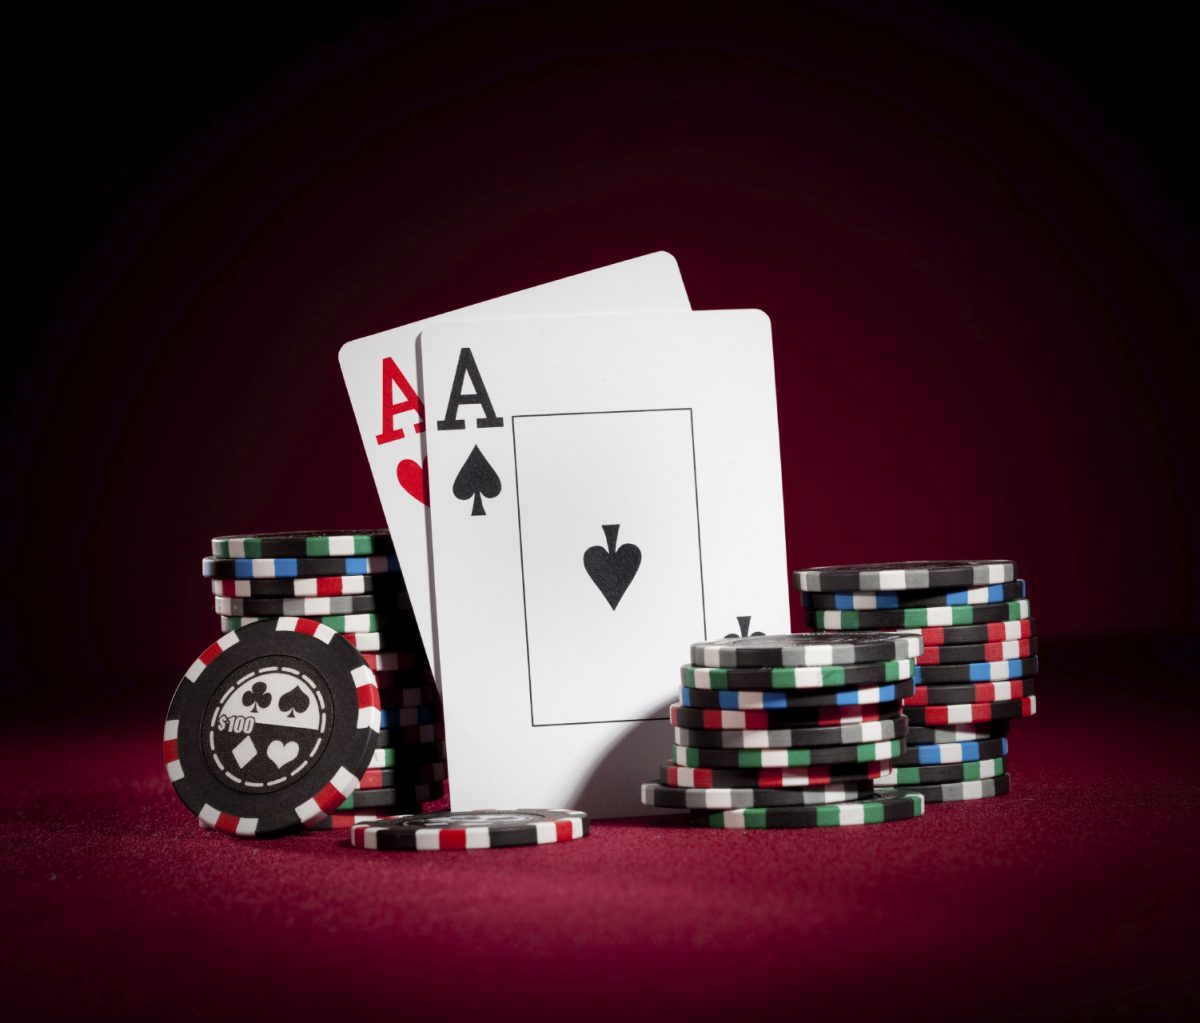 Poker: Types of players and styles of play